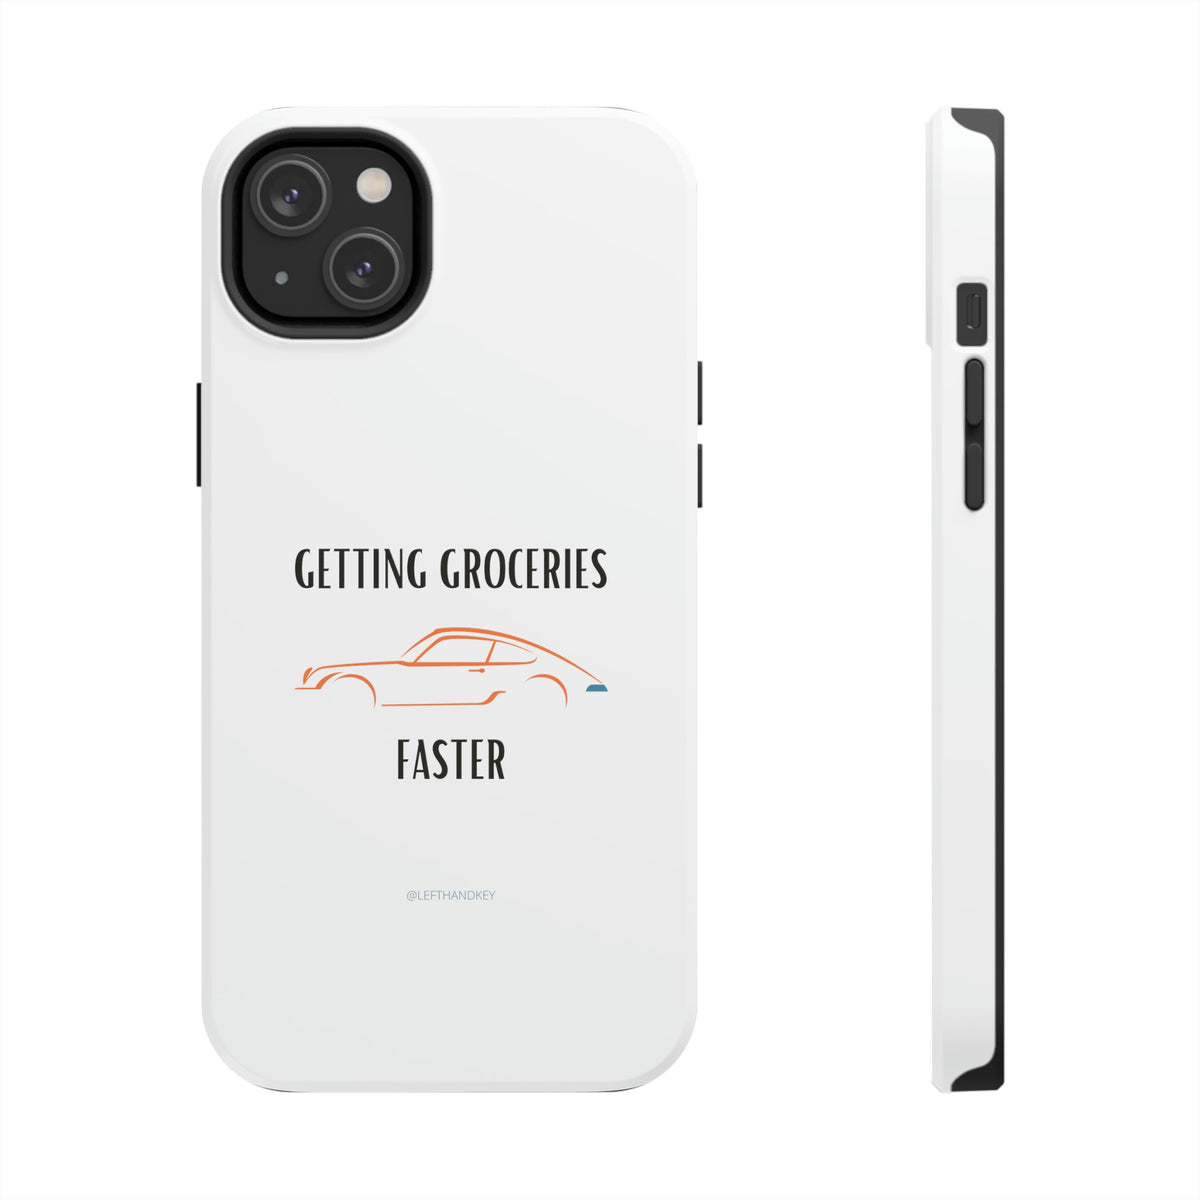 Getting Groceries Faster Tough Phone Cases